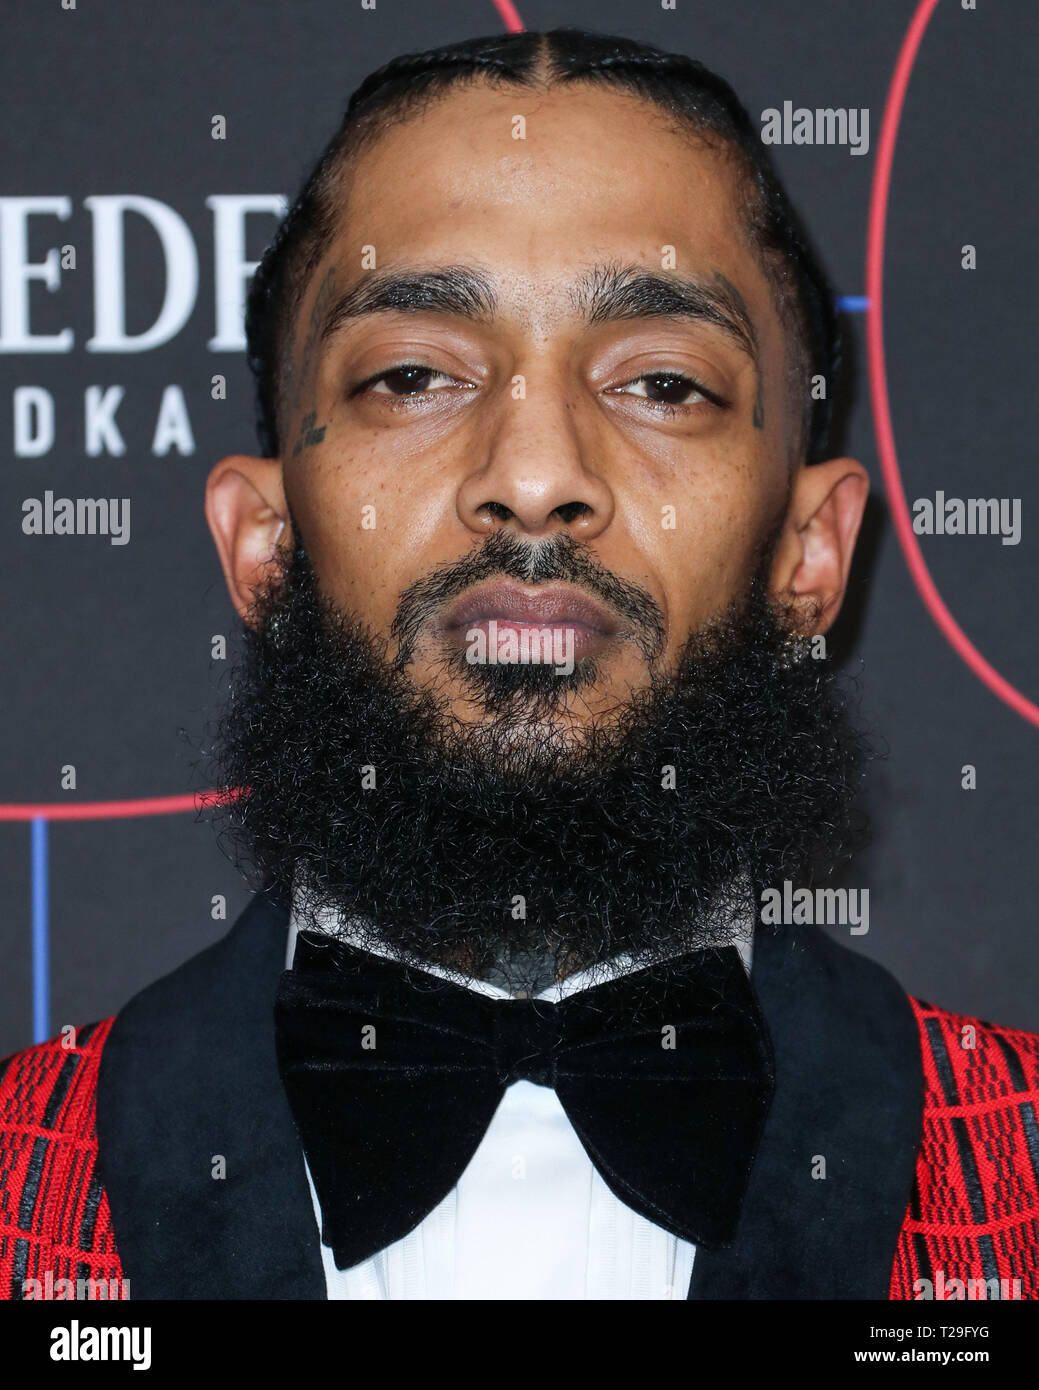 Nipsey Hussle Embodied the Best of Hip-Hop